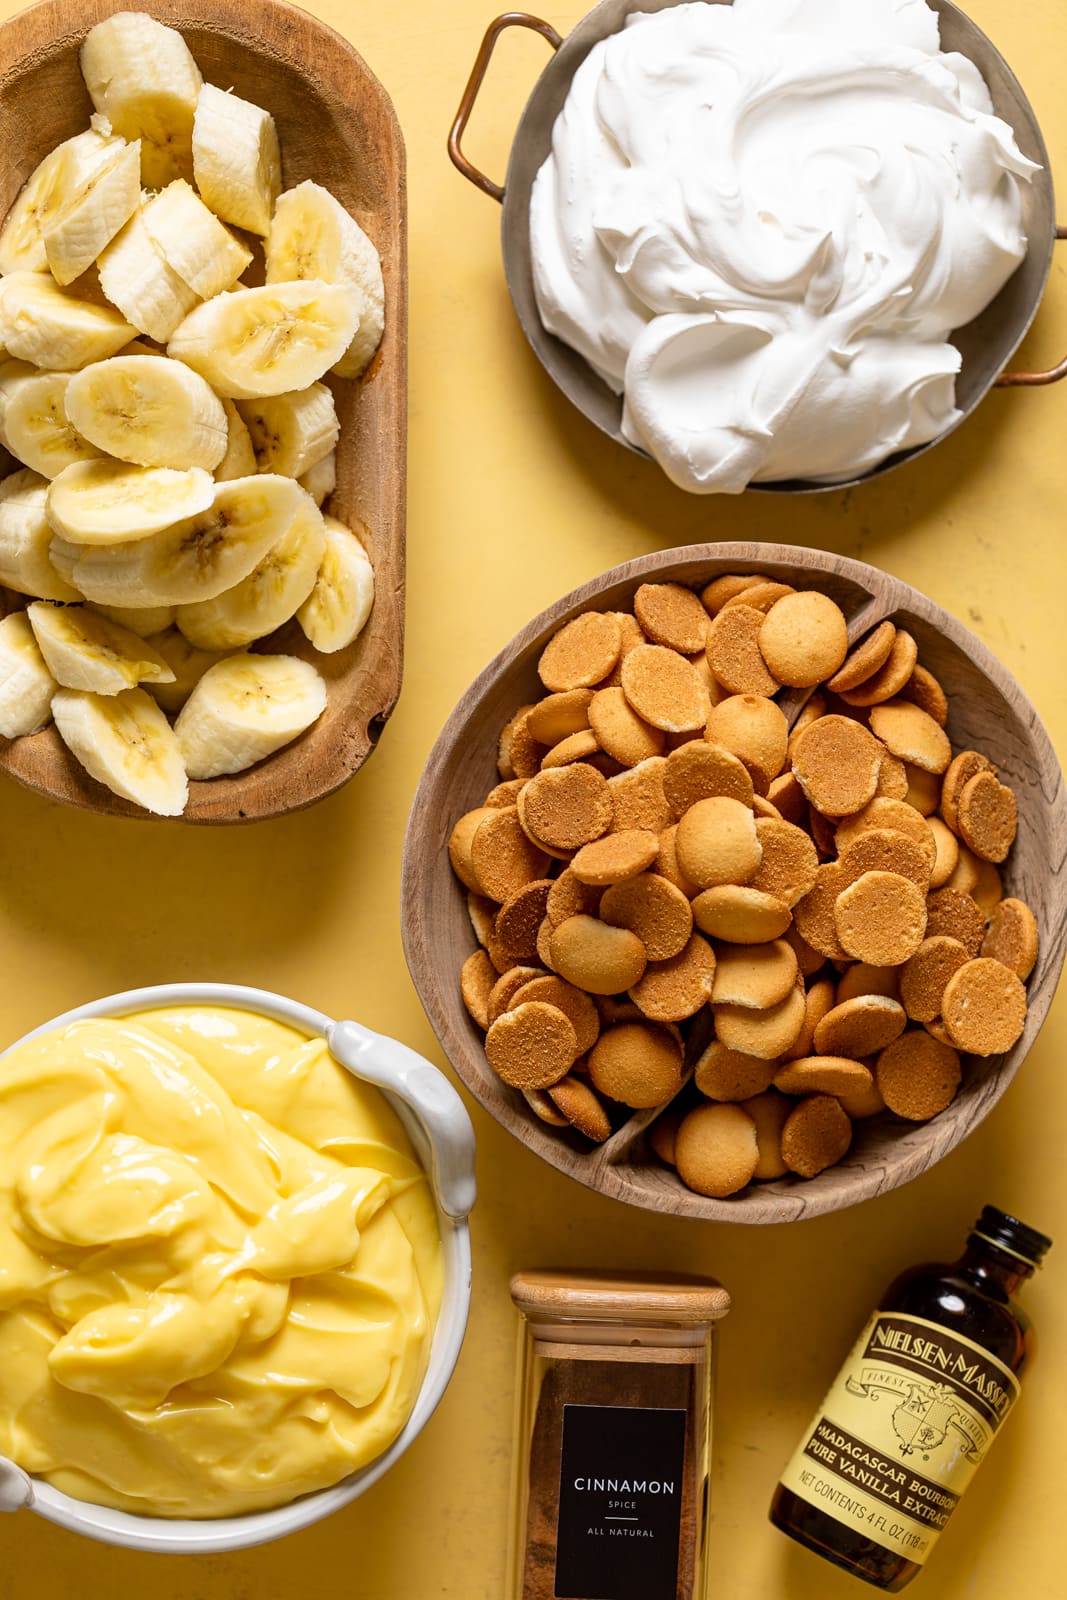 Ingredients for Southern Banana Pudding including Nilla wafers, vanilla extract, and cinnamon